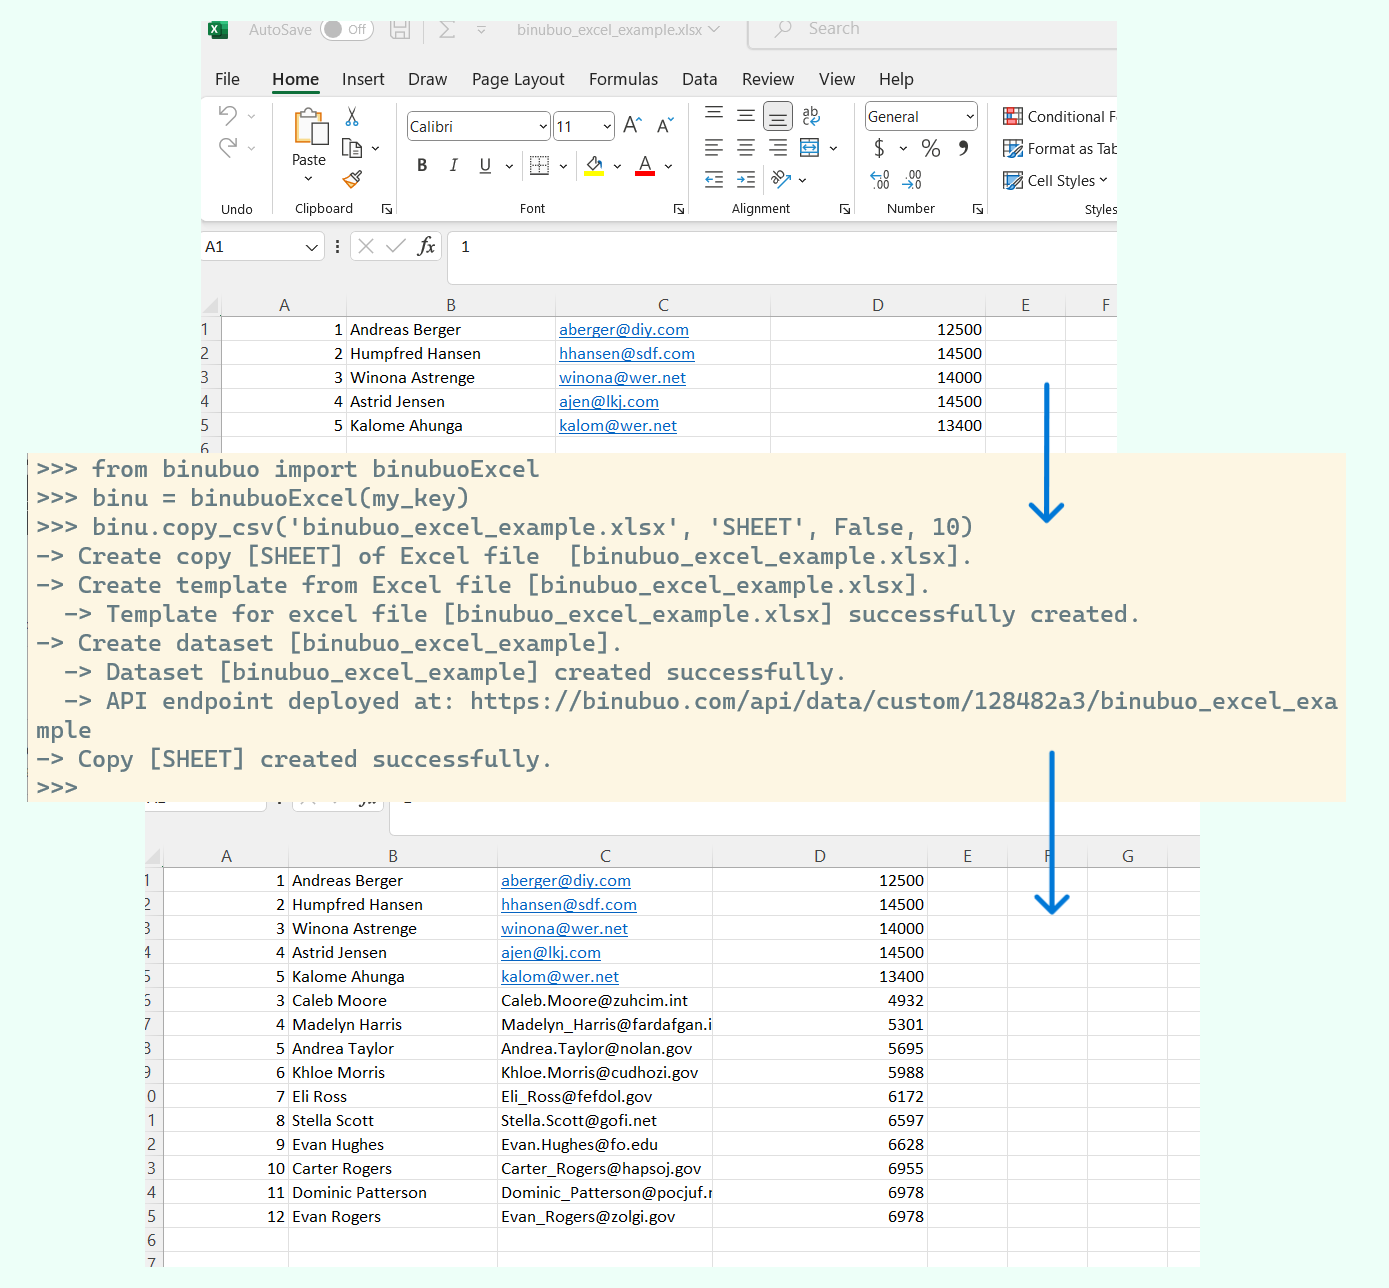 Binubuo can read excel spreadsheets and append more random data automatically.